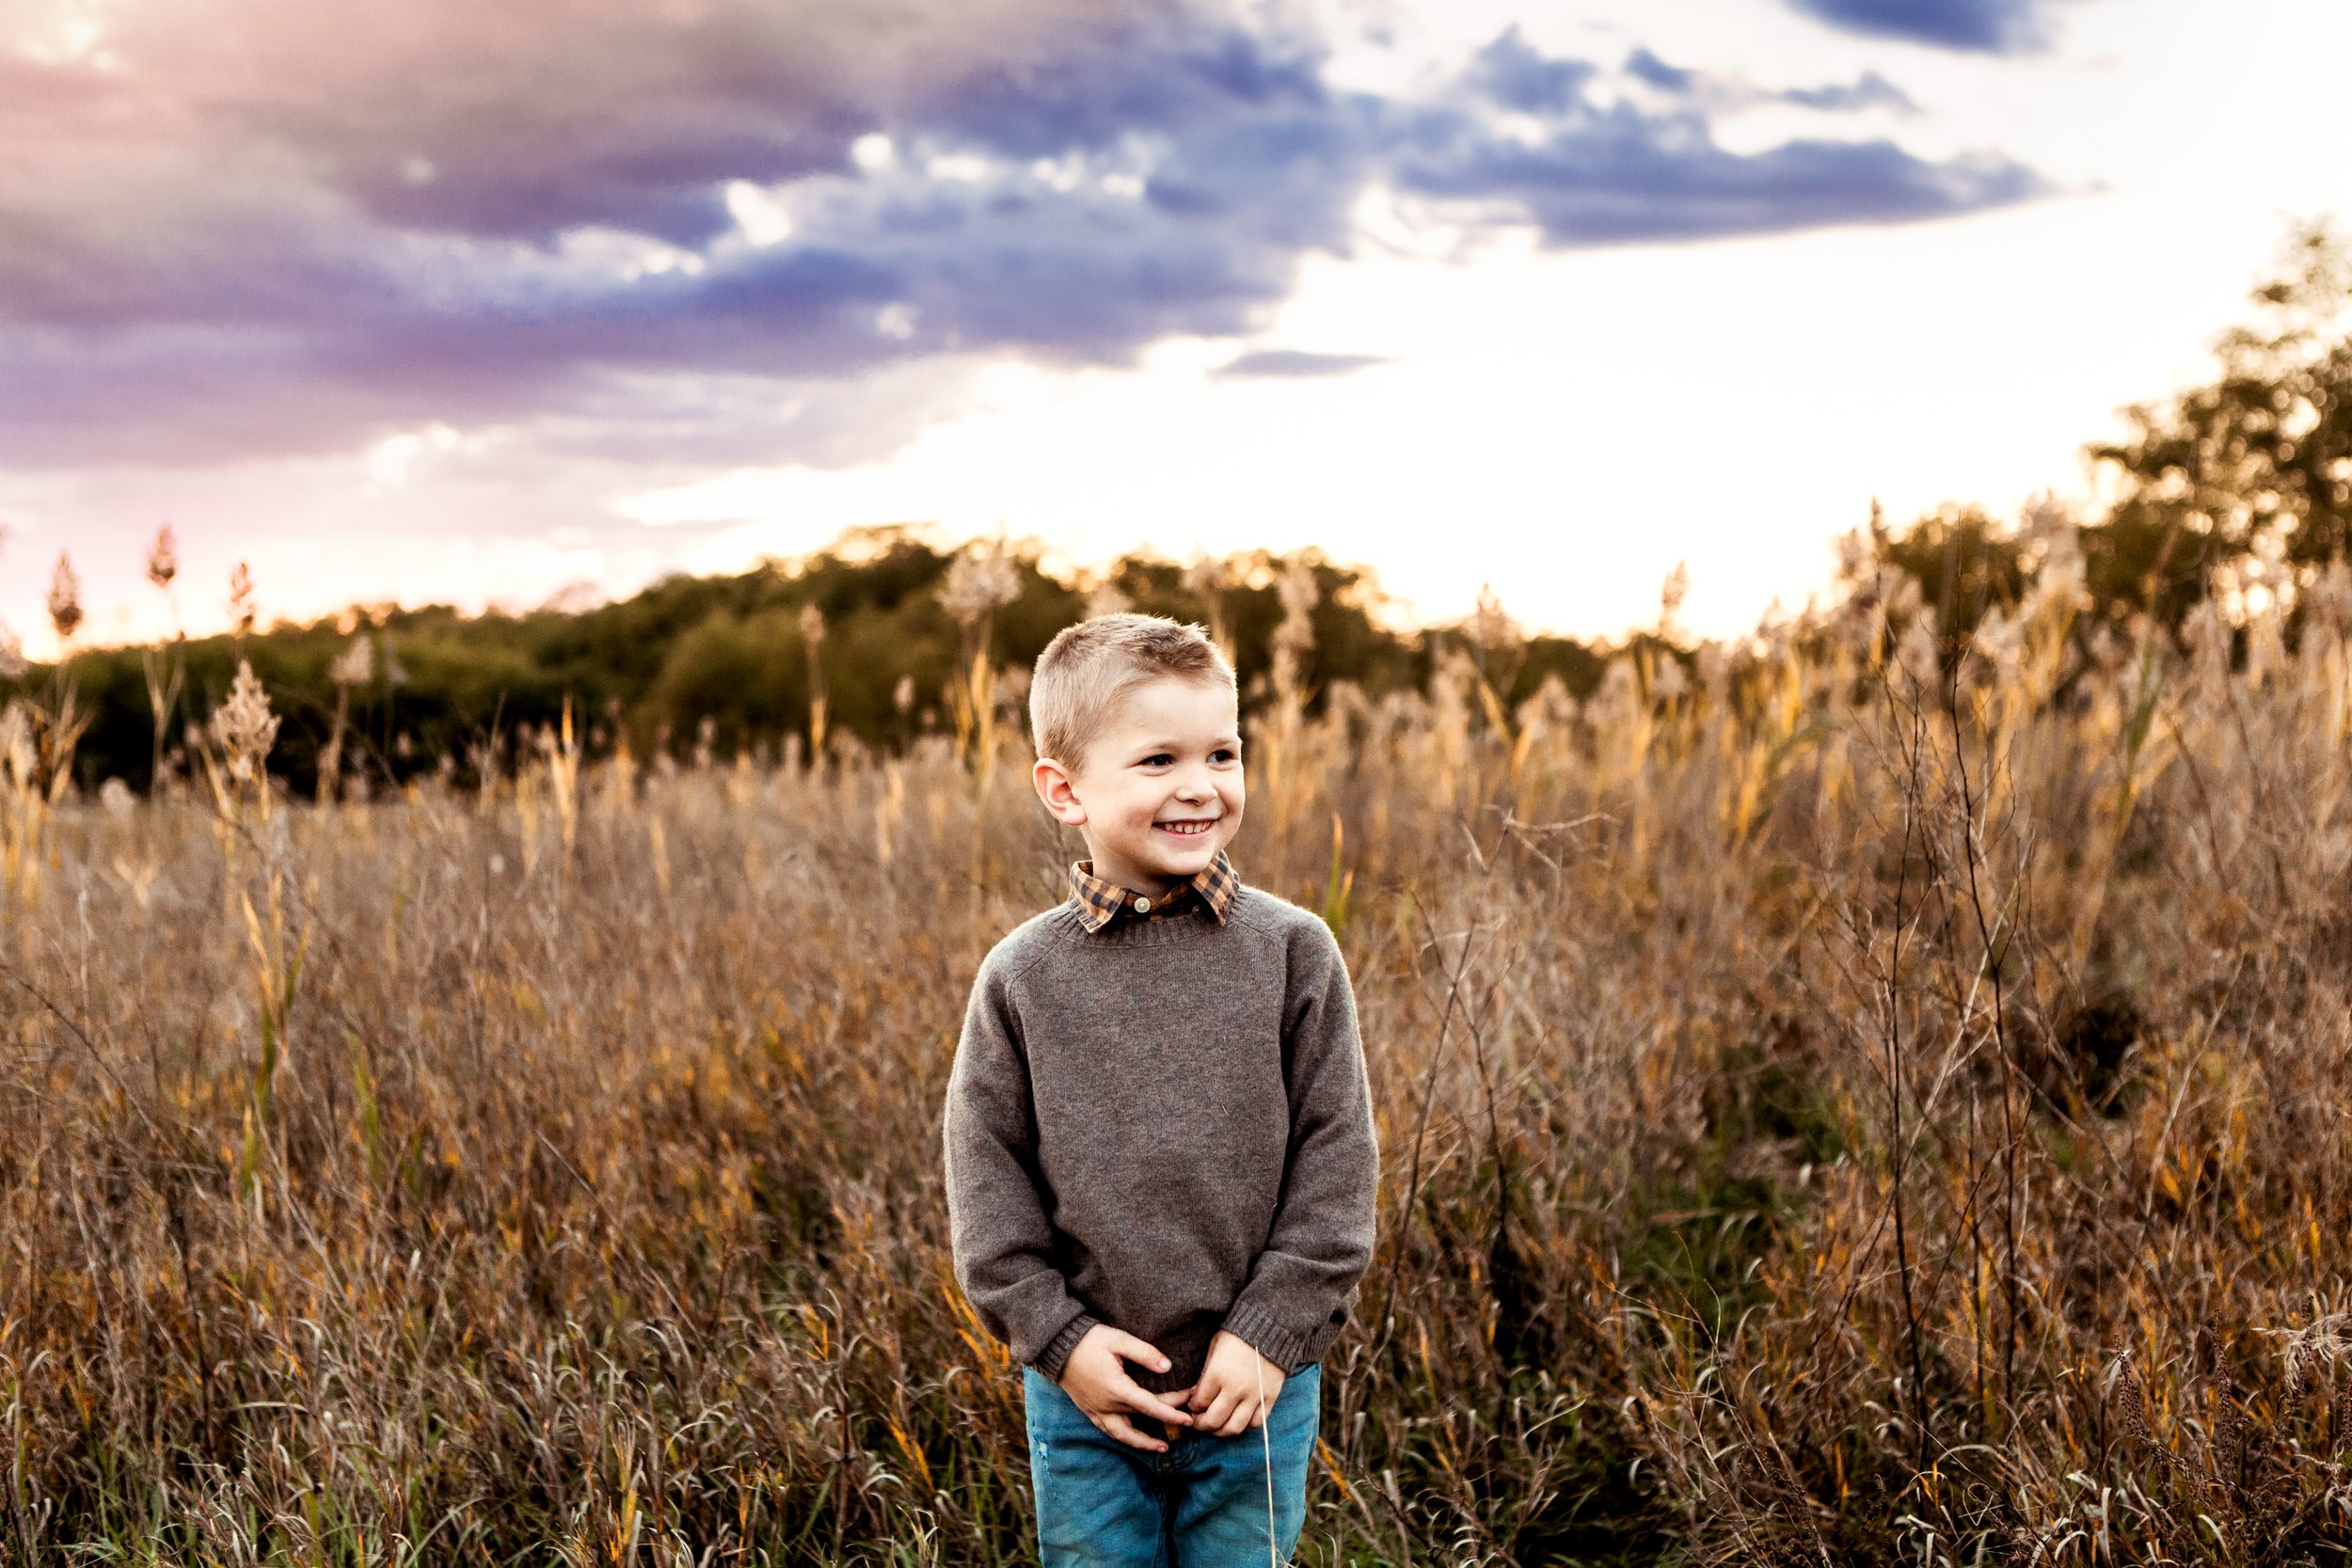  Five tips for hiring the right photographer by Teala Ward Photographer in the Illinois Valley. outdoor family photographer #TealaWardPhotography #TealaWardFamilies #photographers #IllinoisPhotographer #ILphotographers #IllinoisValleyFamilies 